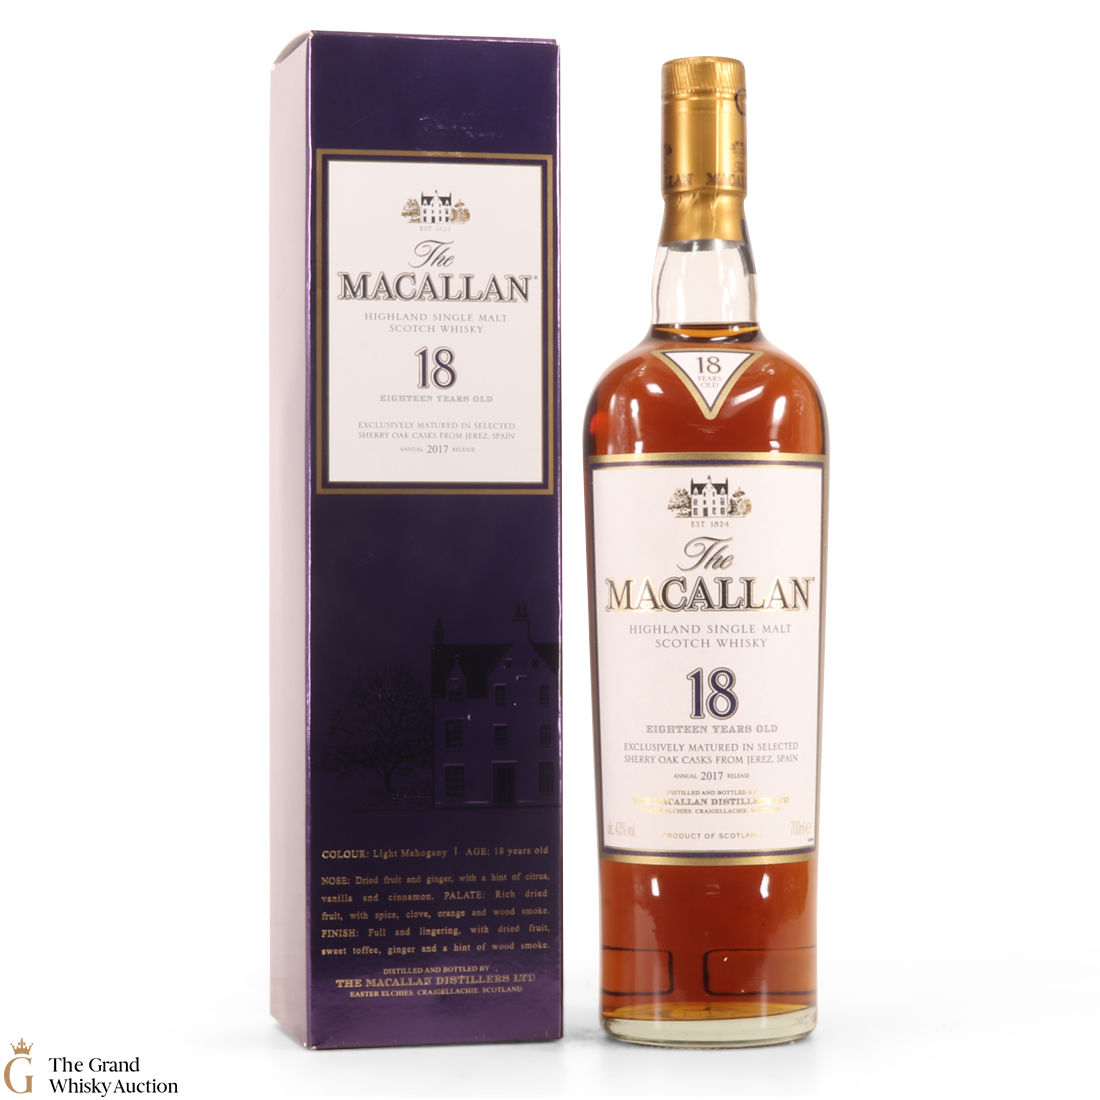 Macallan 18 Year Old 2017 Release Auction The Grand Whisky Auction